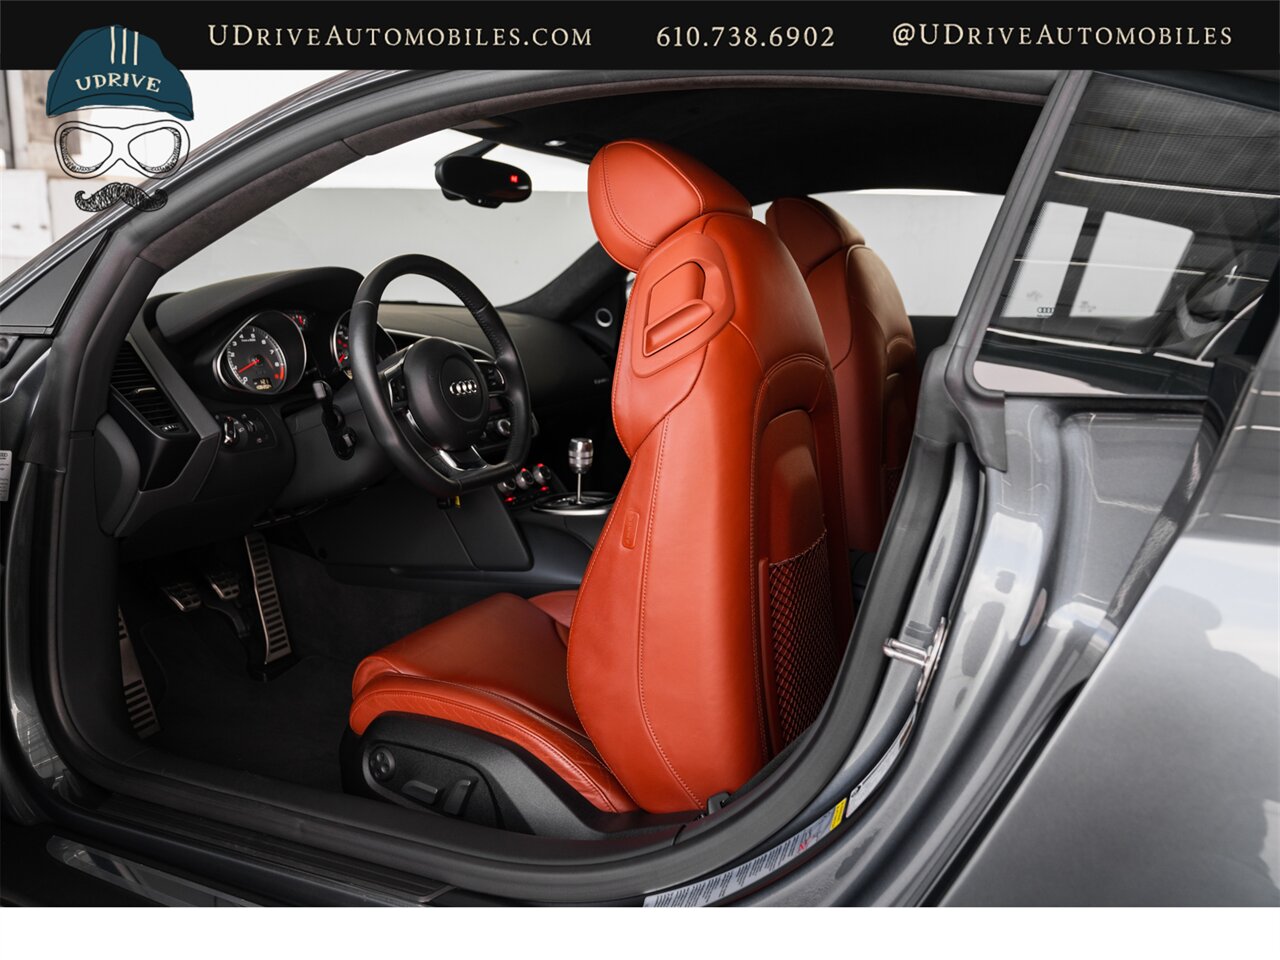 2009 Audi R8 Quattro  4.2 V8 6 Speed Manual 15k Miles - Photo 45 - West Chester, PA 19382